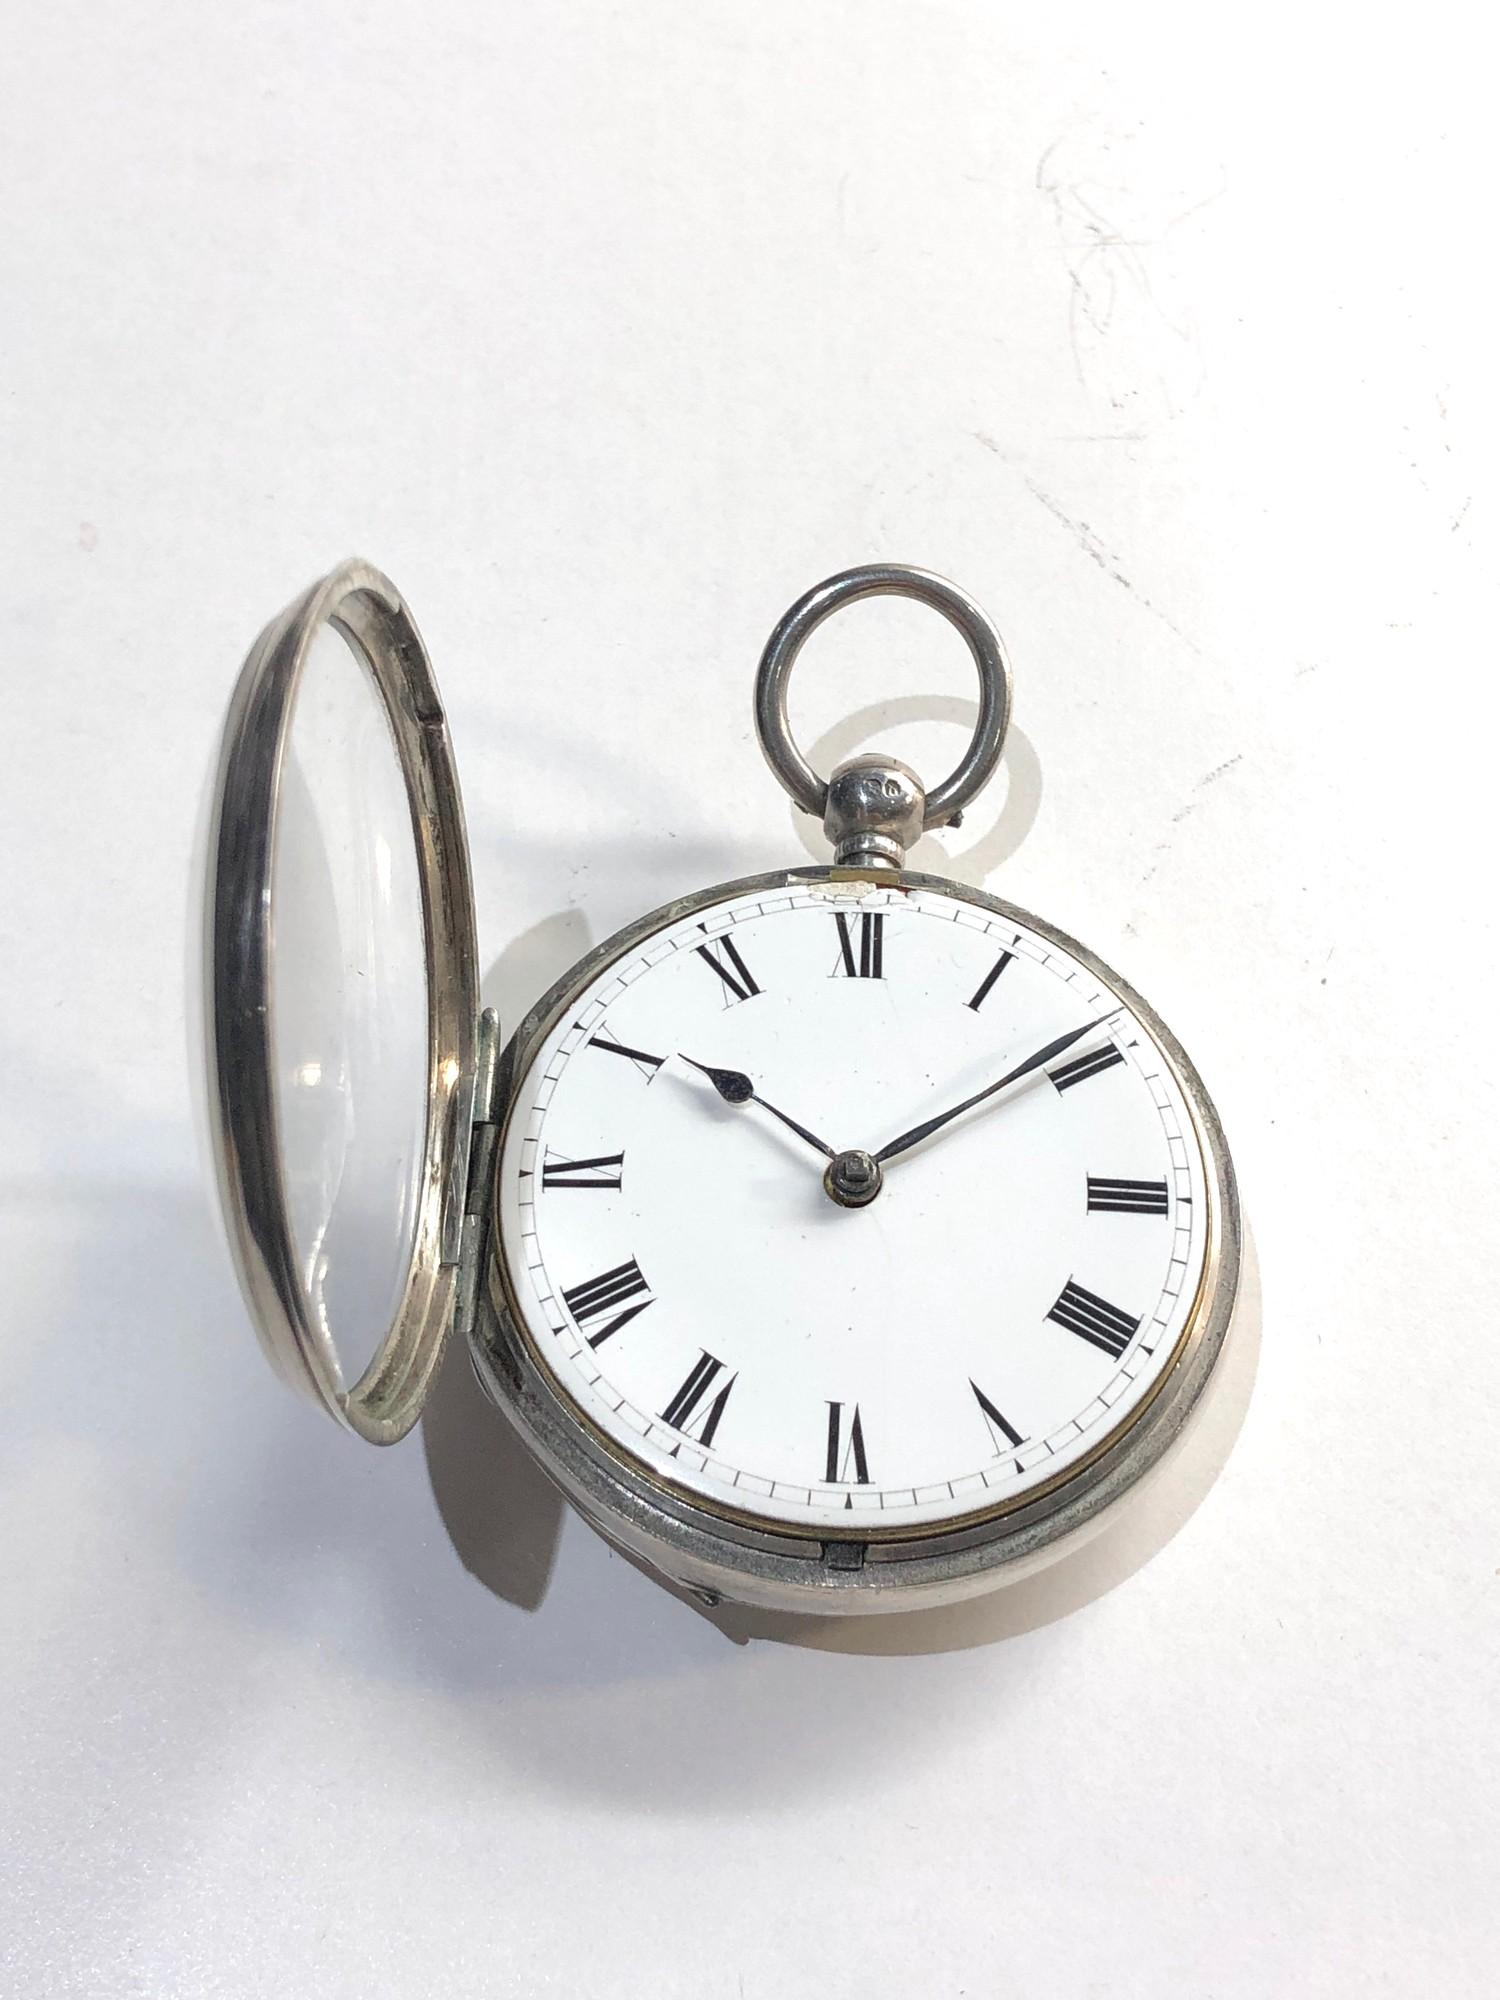 Antique silver fusee pocket watch by Davis & Co Liverpool diamond end stone overall good condition - Image 3 of 6